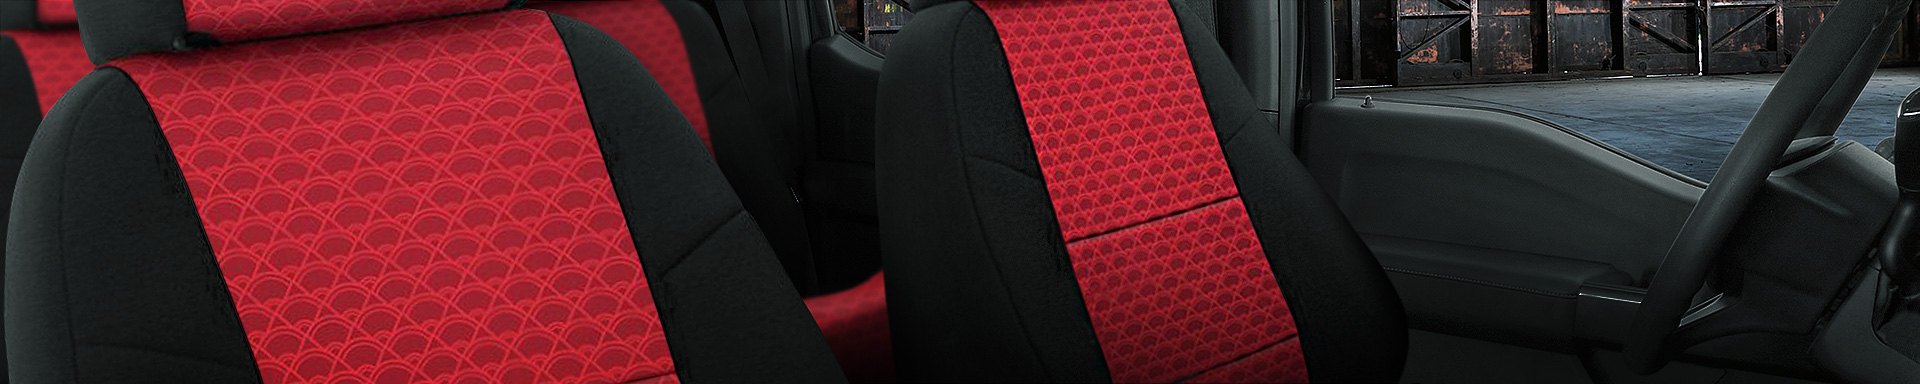 Coverking Neosupreme Designer Printed Seat Covers In Two New Colors Are Now Available